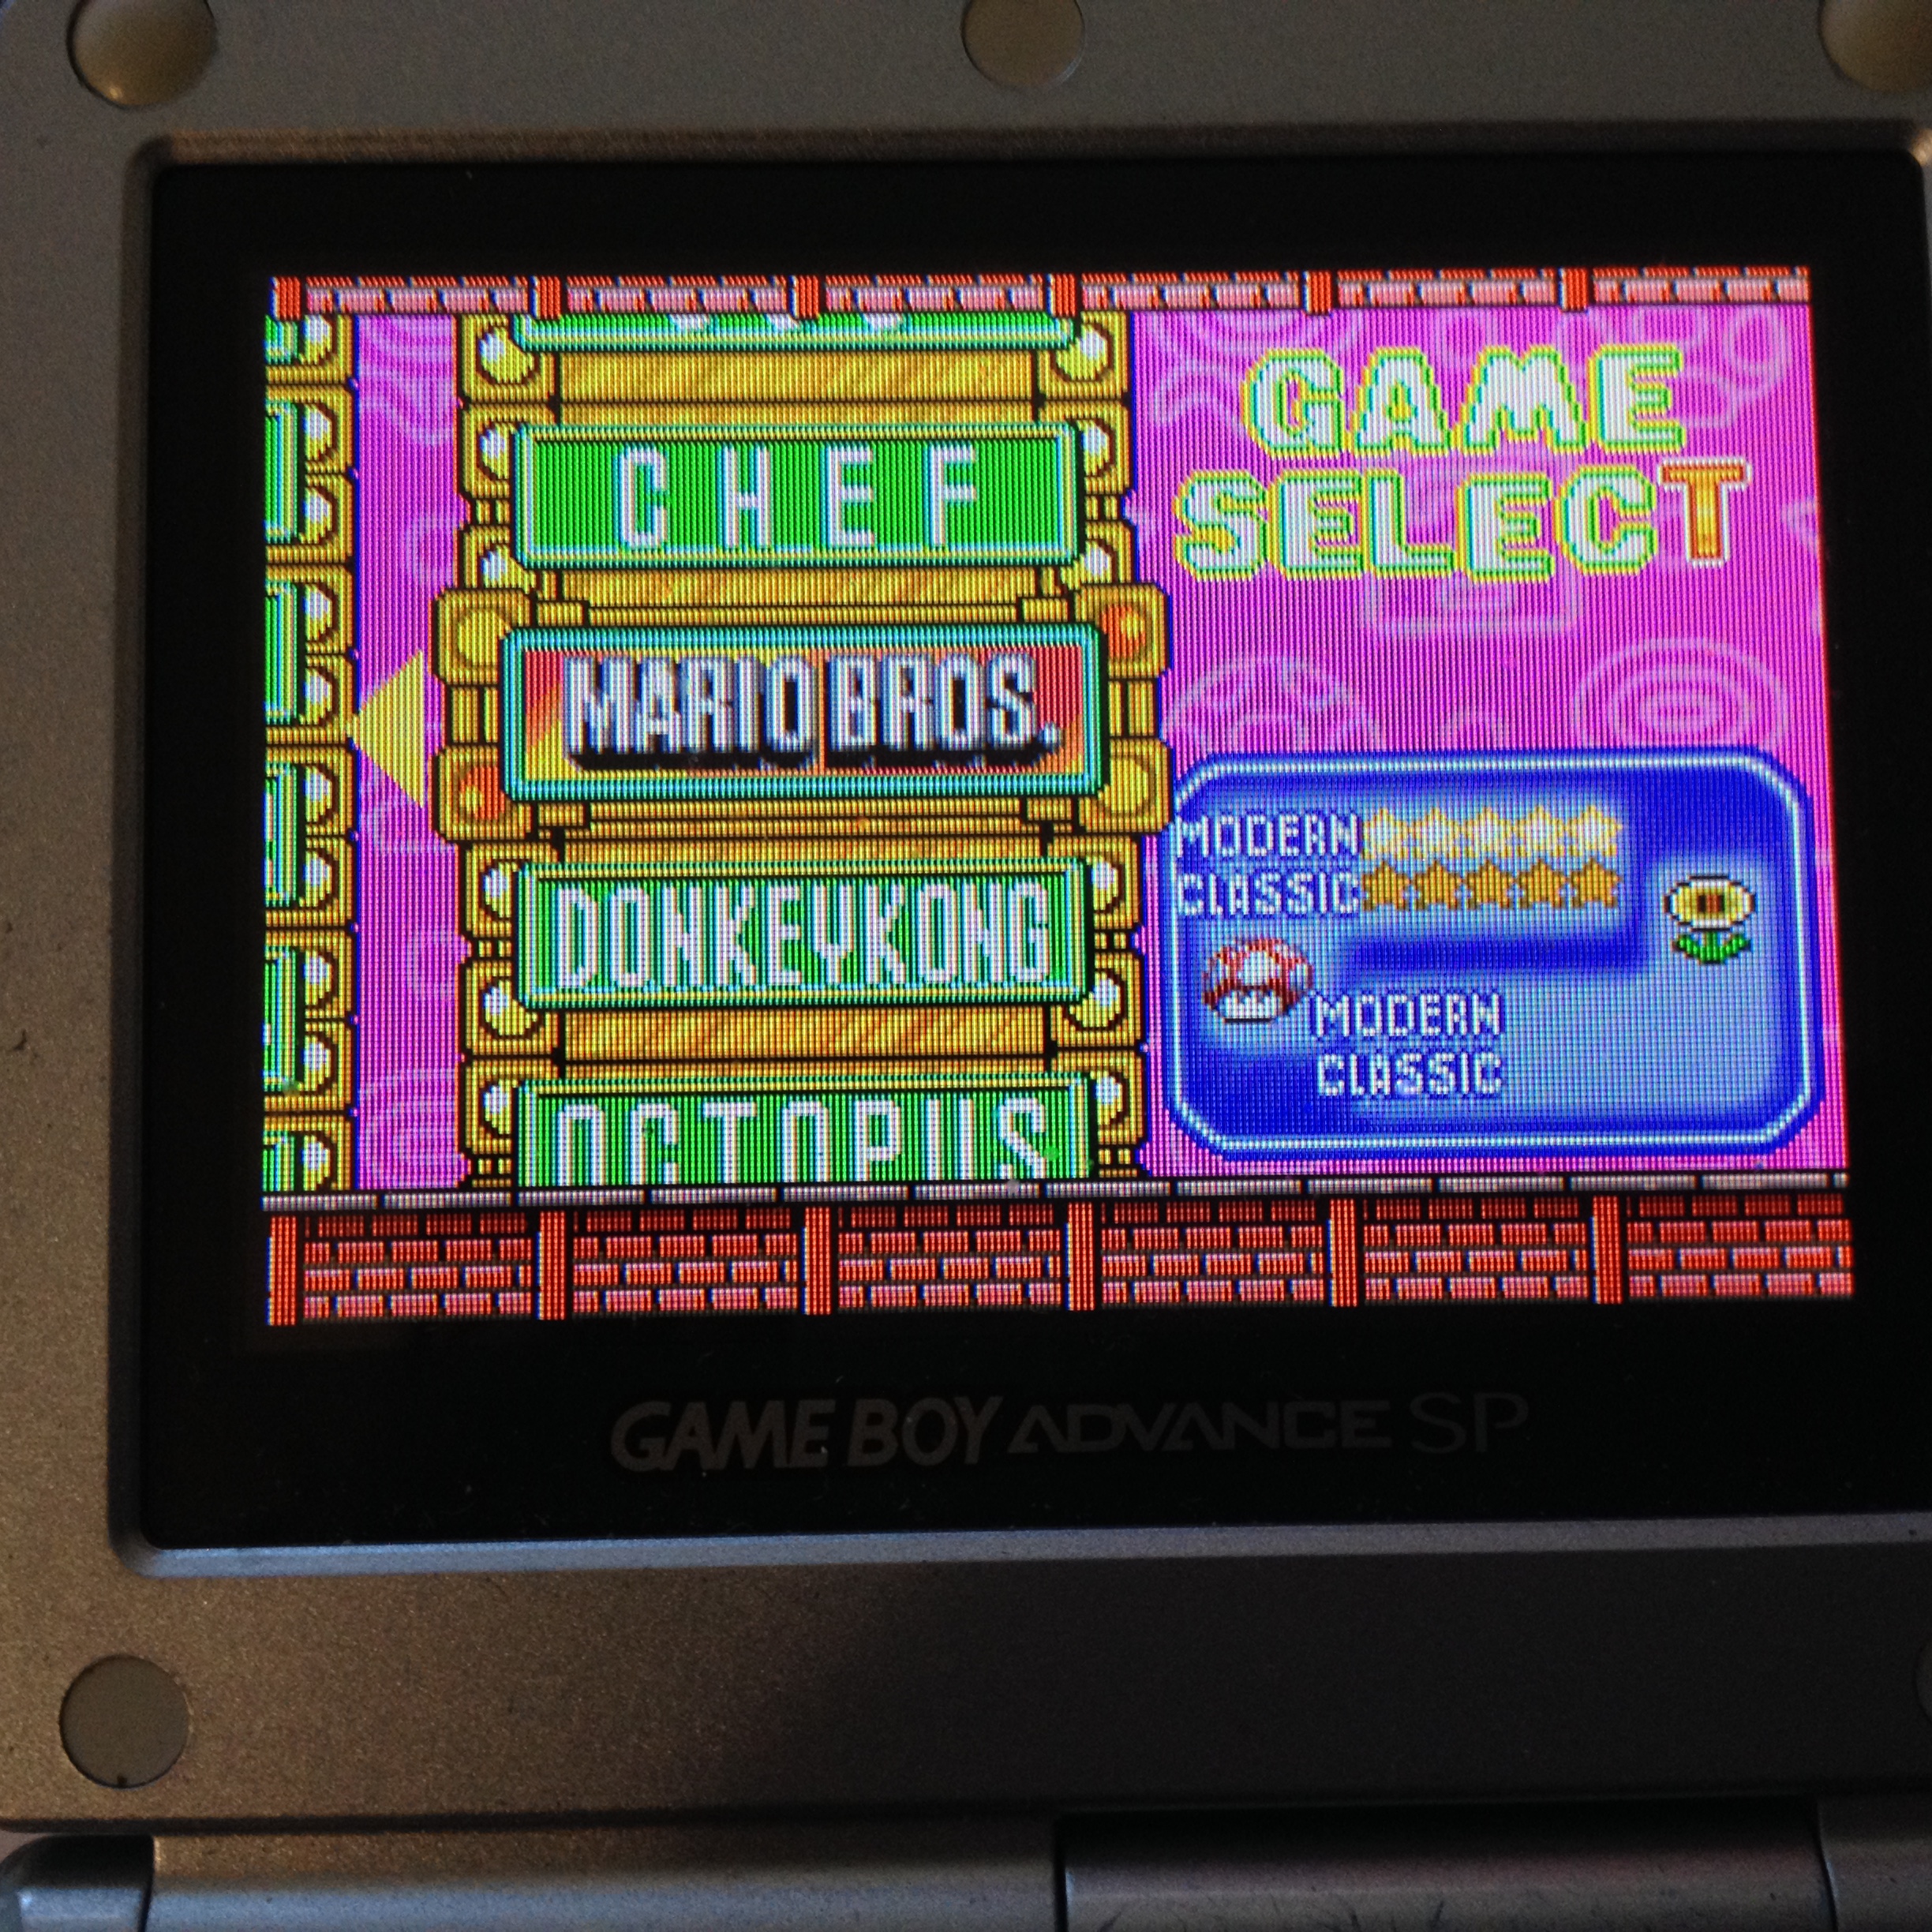 zerooskul: Game & Watch Gallery 4: Mario Bros [Modern: Easy] (GBA) 1,216 points on 2019-08-10 16:43:09